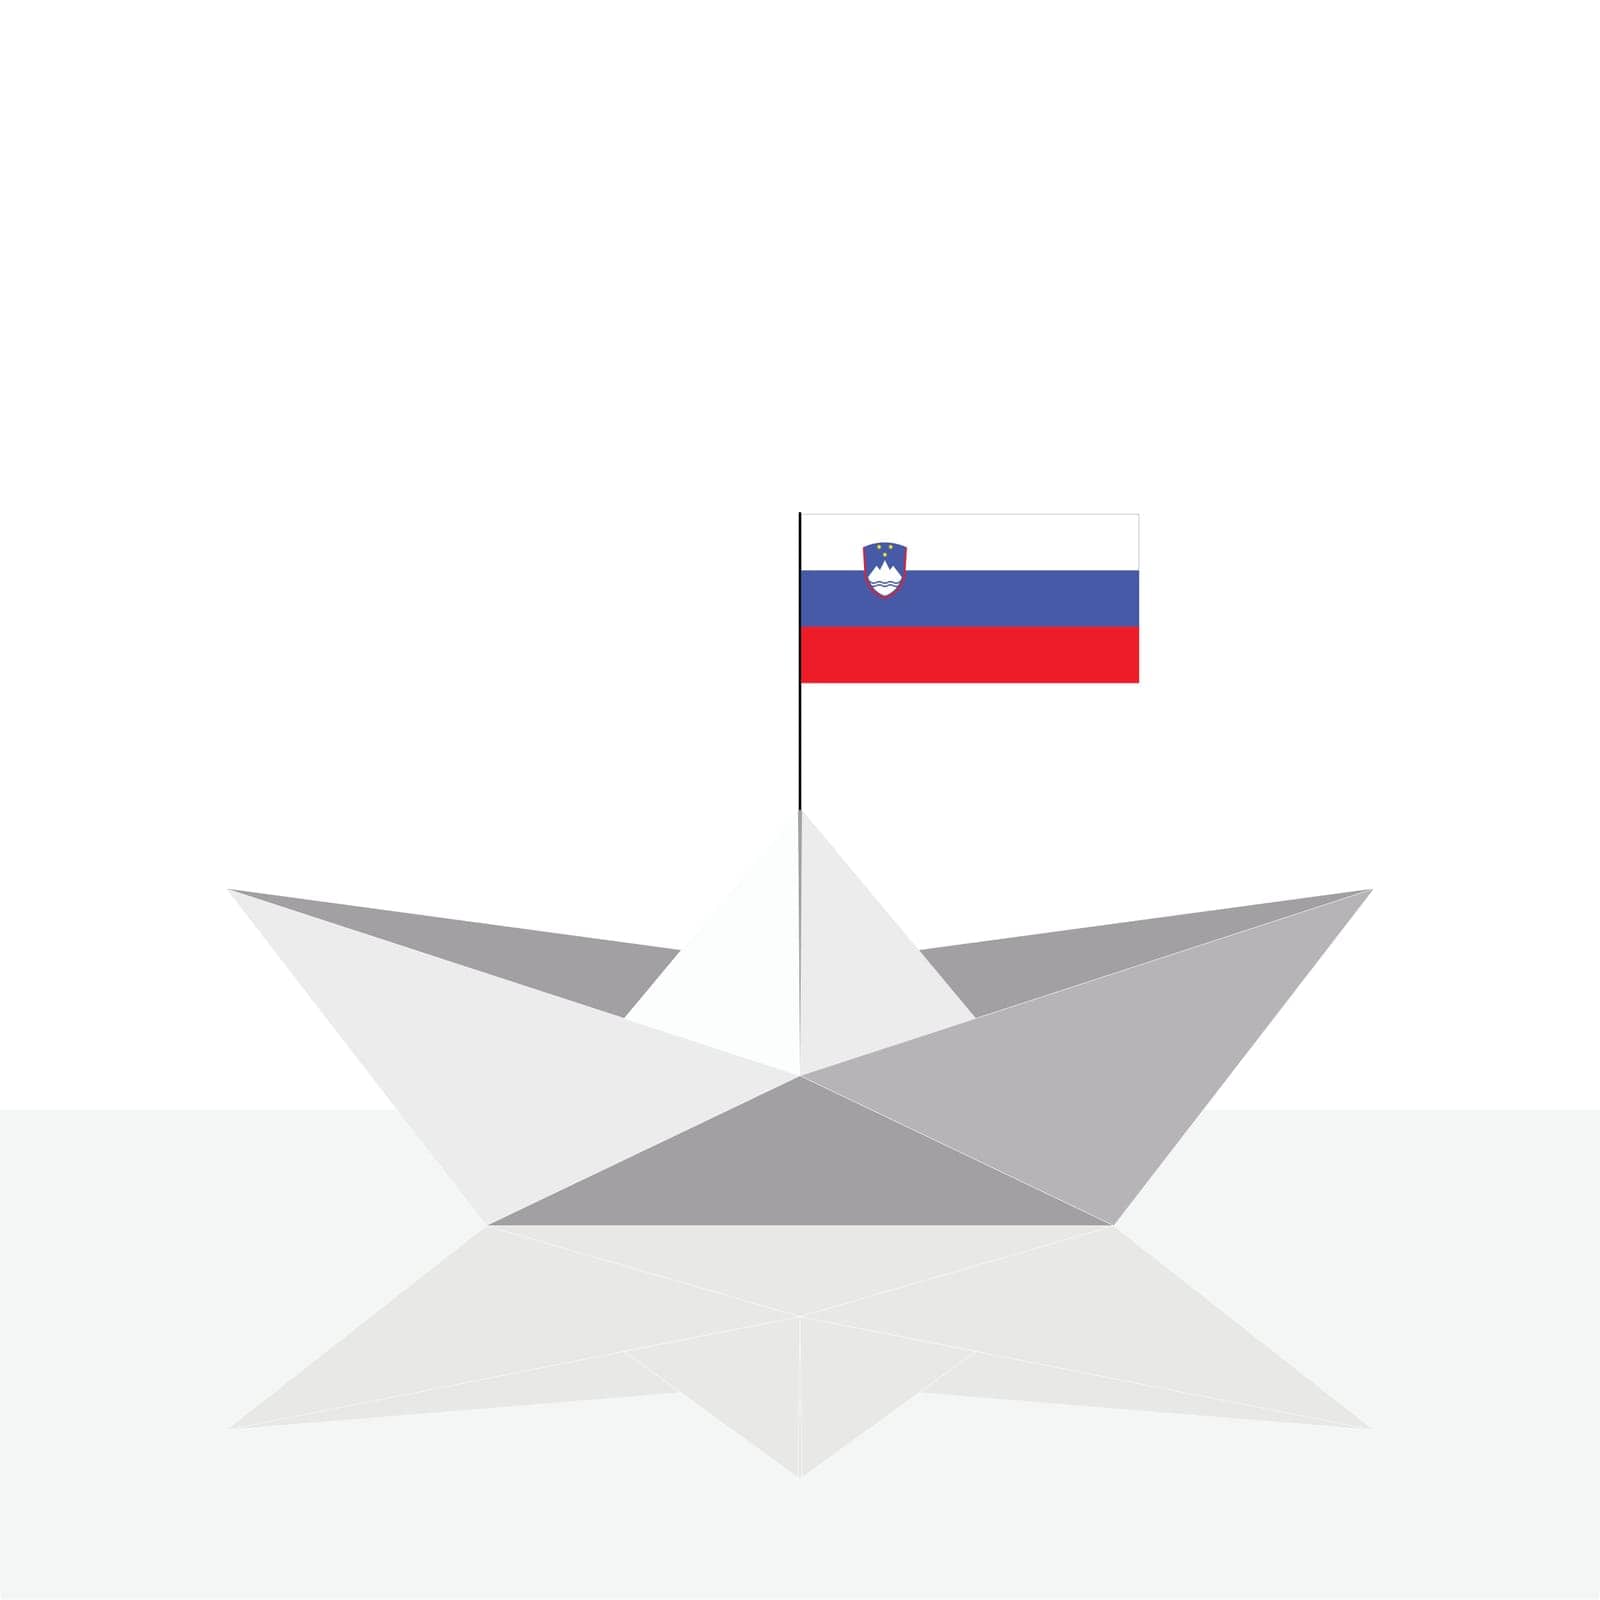 Origami paper ship with reflection and Slovenia flag. by AliaksaB